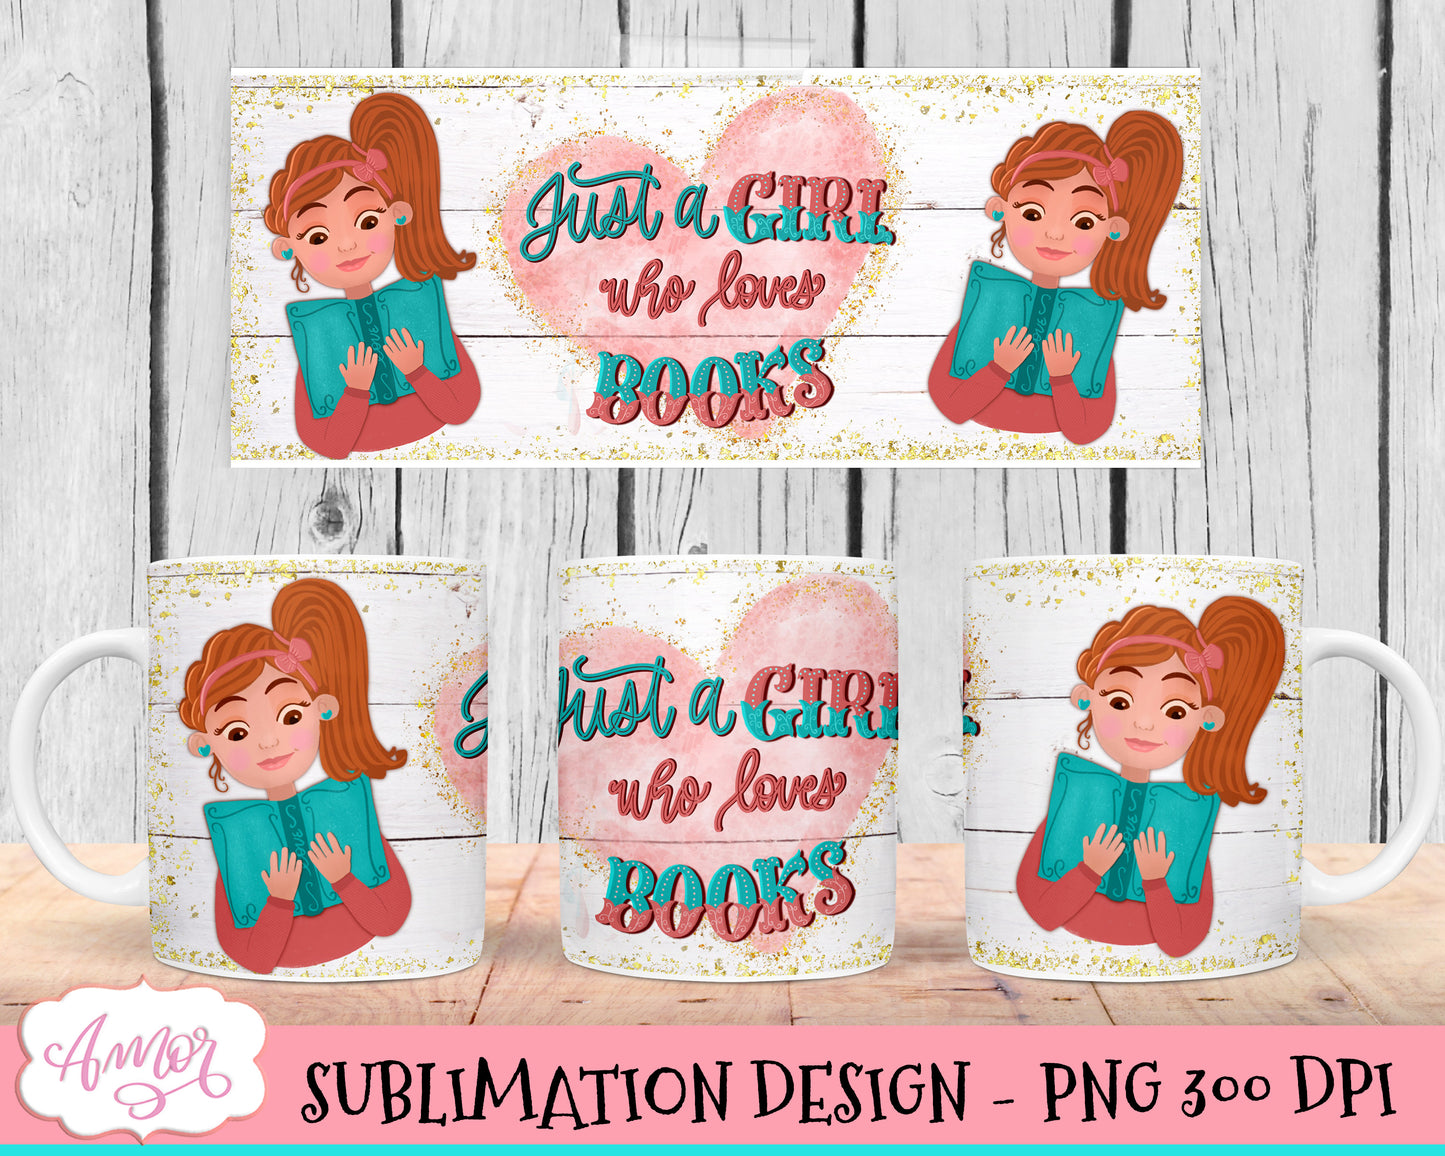 Just a girl who loves books mug wrap PNG for sublimation